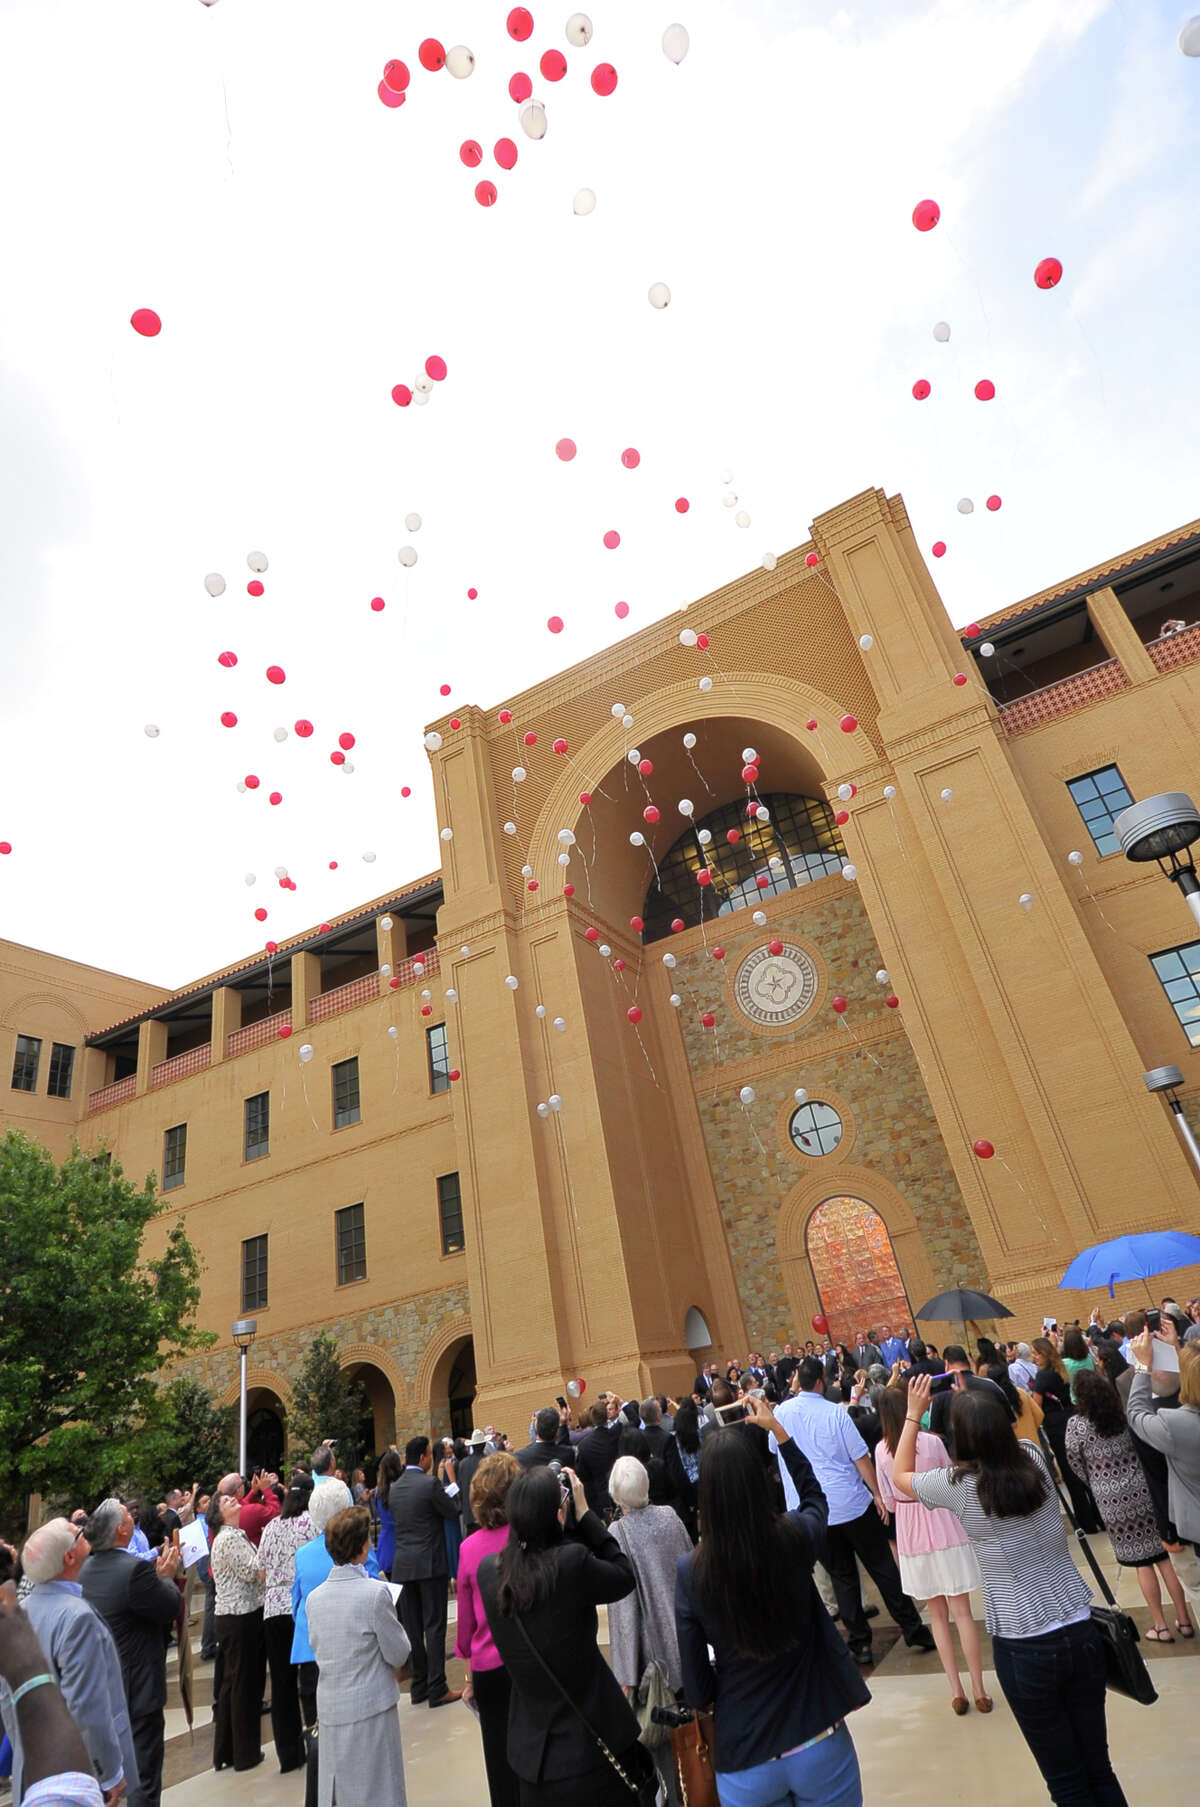 Balloons rise into the sky during the debut ceremonies for the new central academic center at Texas A&M University-San Antonio on Wednesday morning, Sept. 17, 2014.